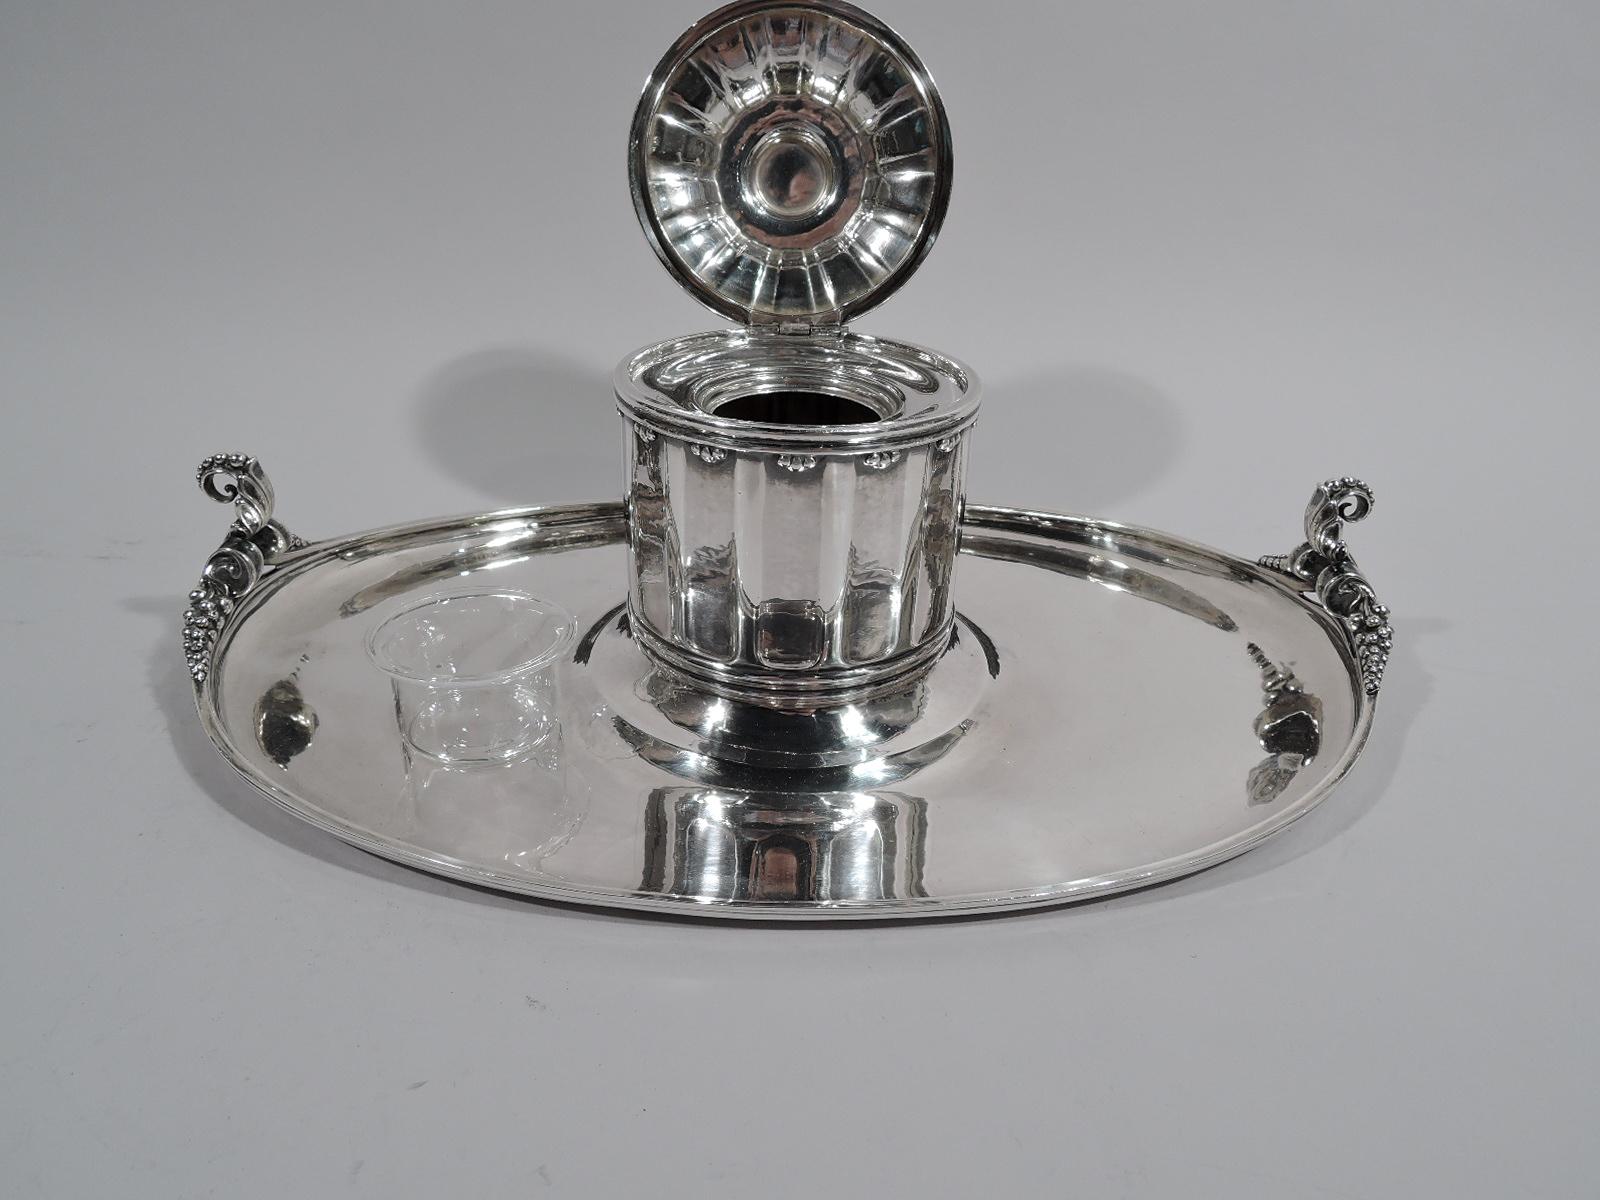 Rare Art Nouveau sterling silver inkstand. Made by Georg Jensen in Copenhagen. Fluted columnar drum with raised and hinged cover. Cover top has large bud finial with 4 beaded and scrolled mounts set in pebble-beaded border. Mounted to oval tray with